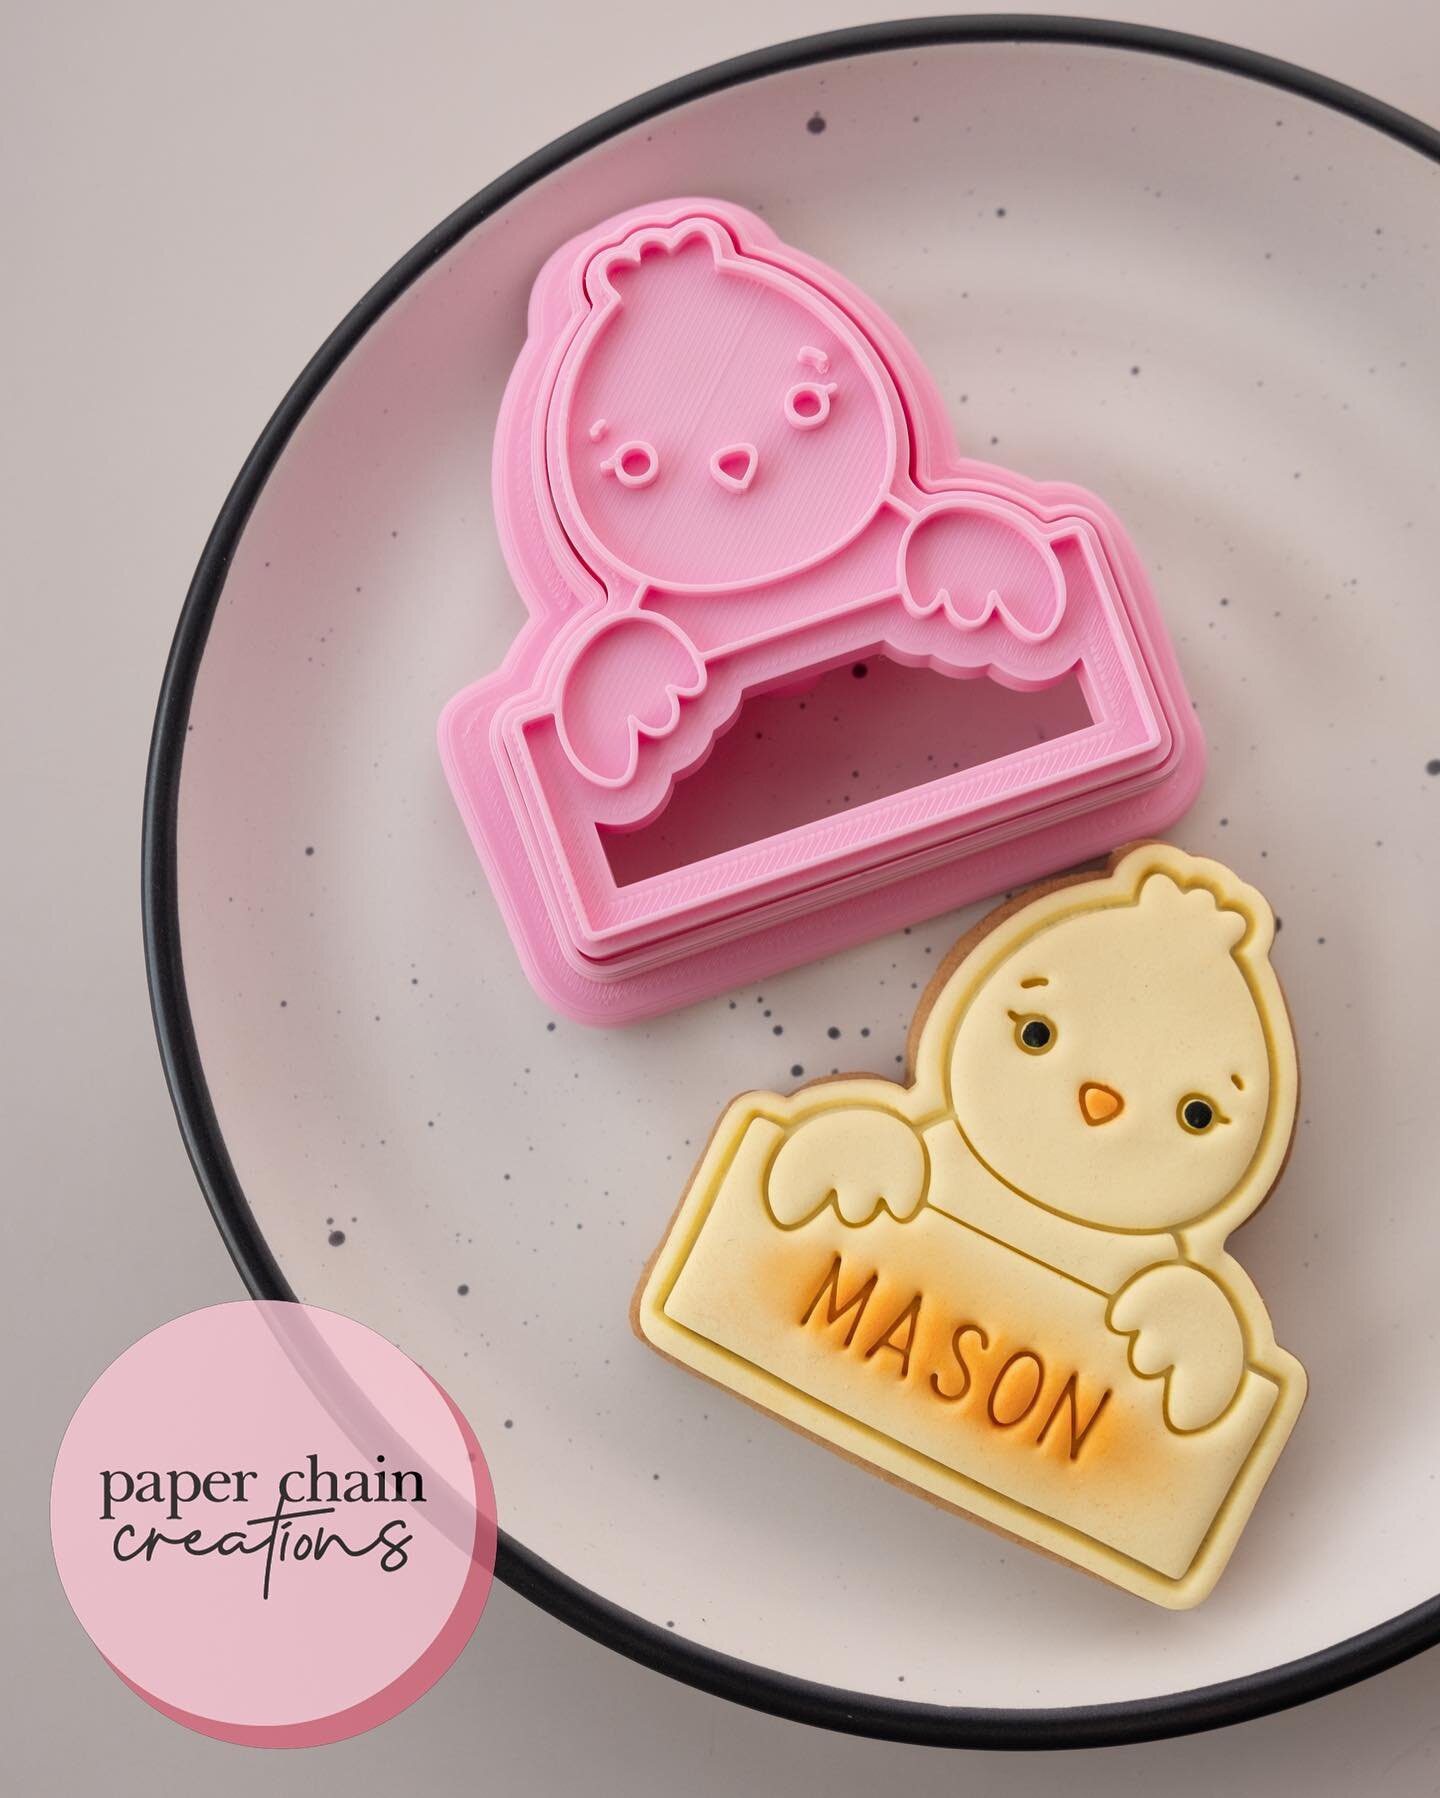 💕 chick plaque 💕
.
This sweet little chick plaque is a super cute way to offer customised cookies to your customers! People love cookies with their names on them. 
.
#fondantcookies #cookiecutters #cookies #paperchaincreations #customcookies #bakin